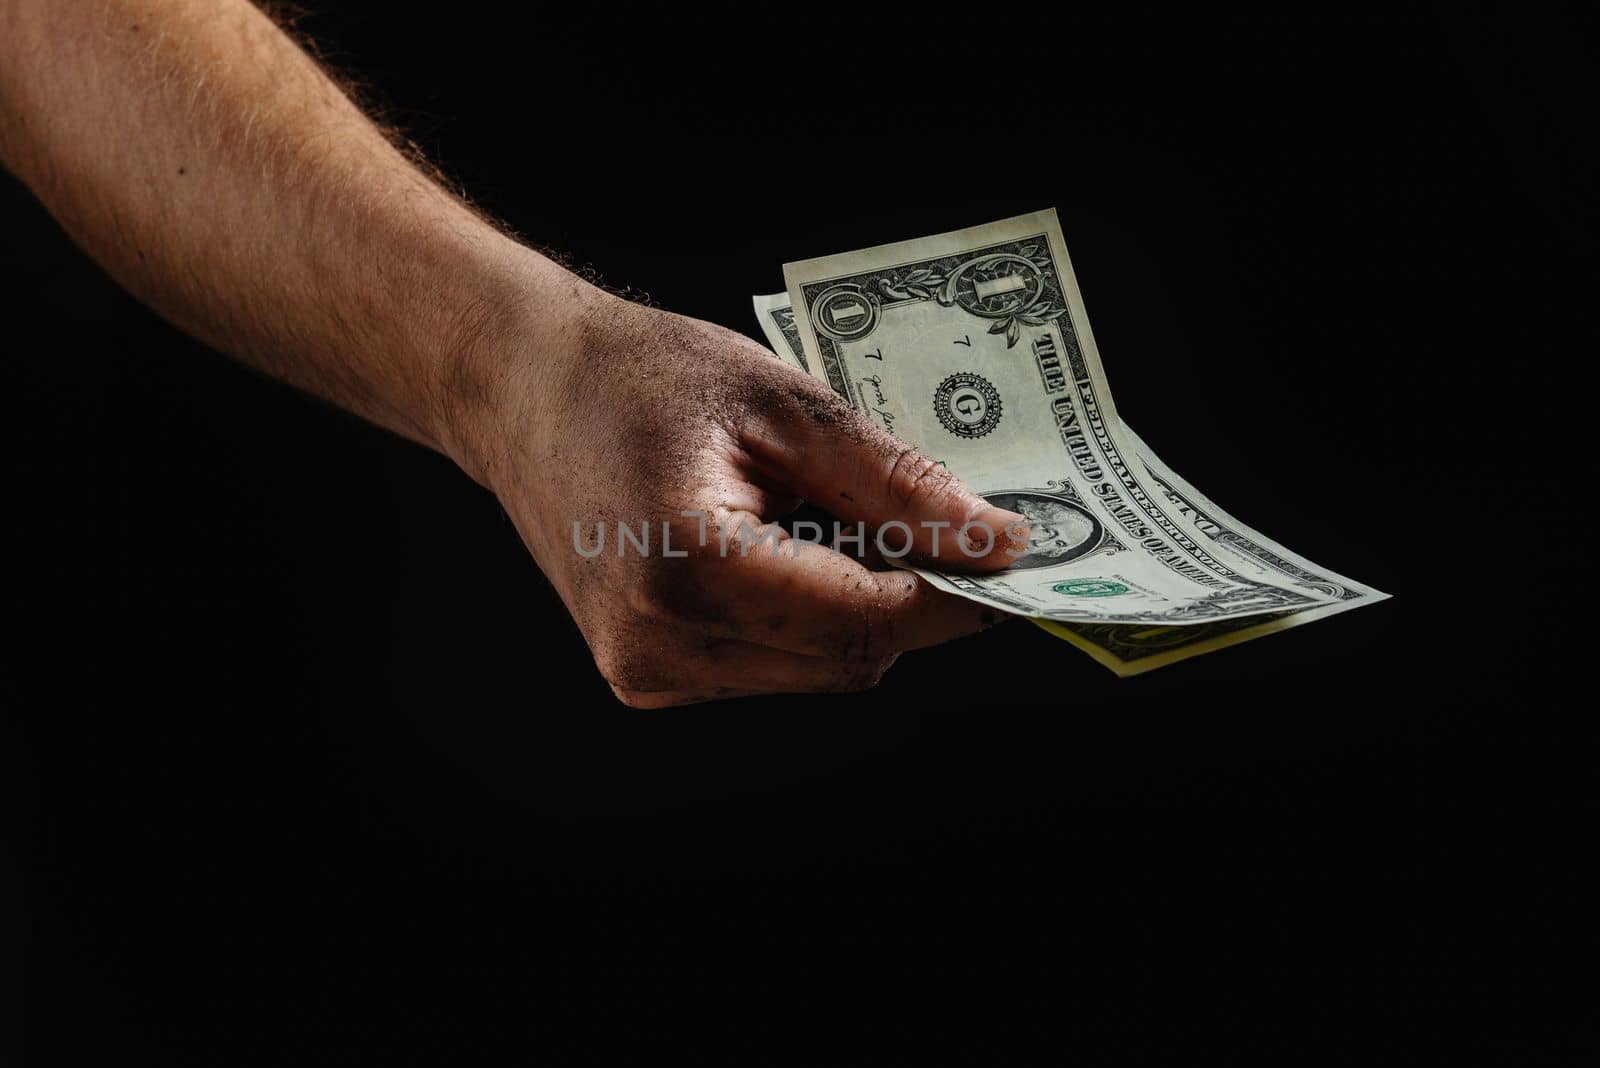 Conceptual image of dirty hands holding a few dollars. Financial crisis. Collapse in the economy. by gulyaevstudio